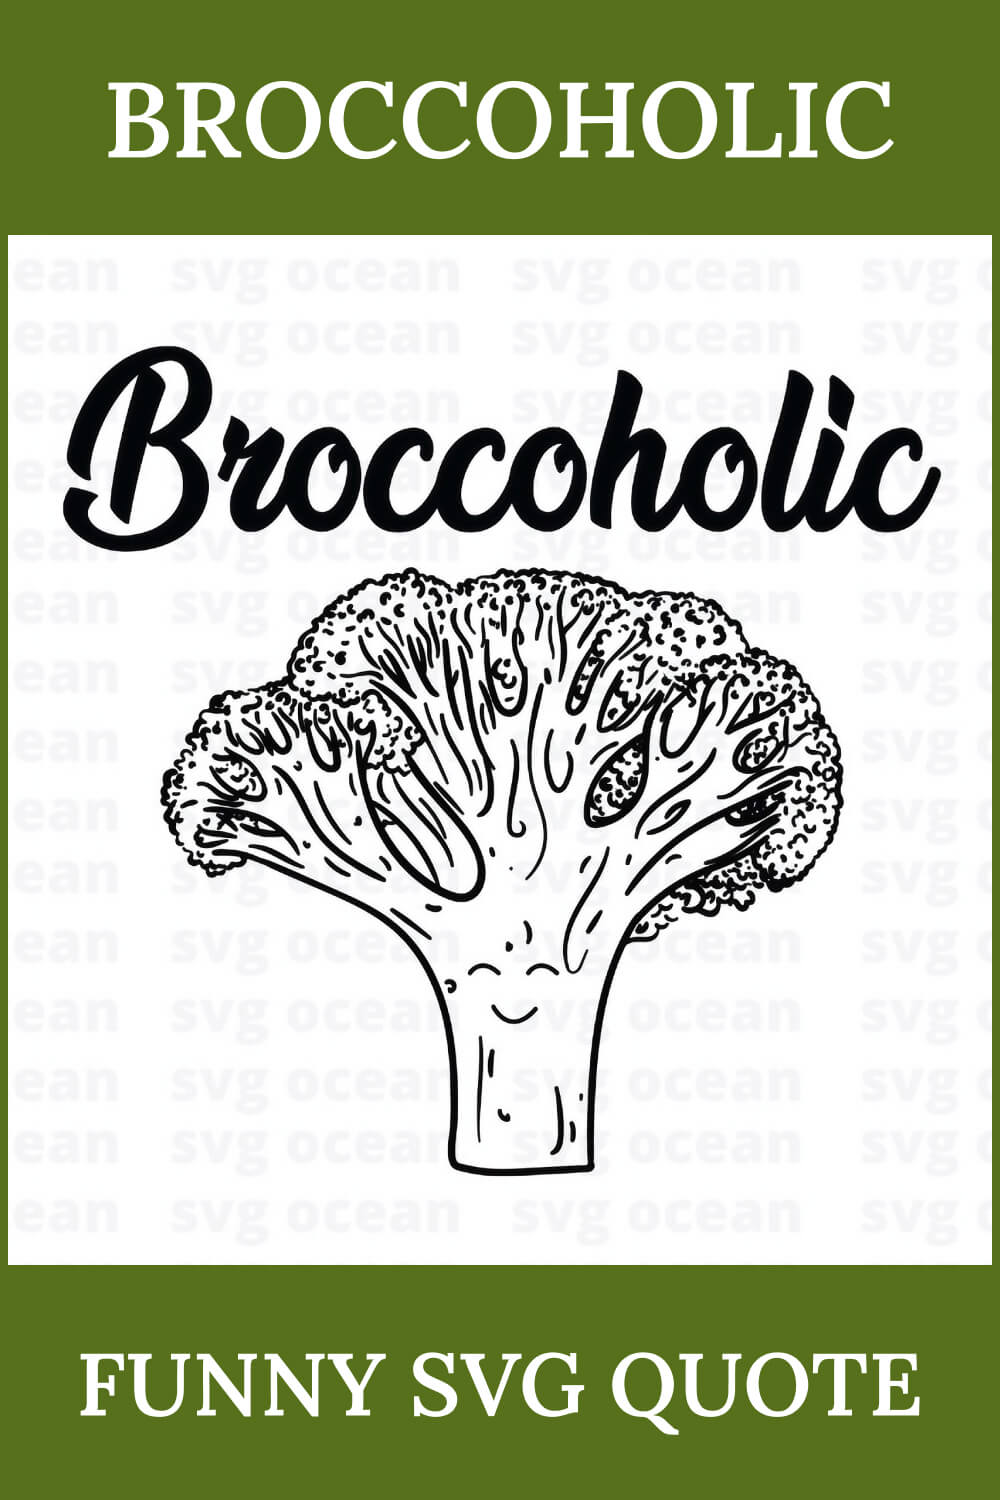 Broccoli as a living being smiles and rejoices in life.